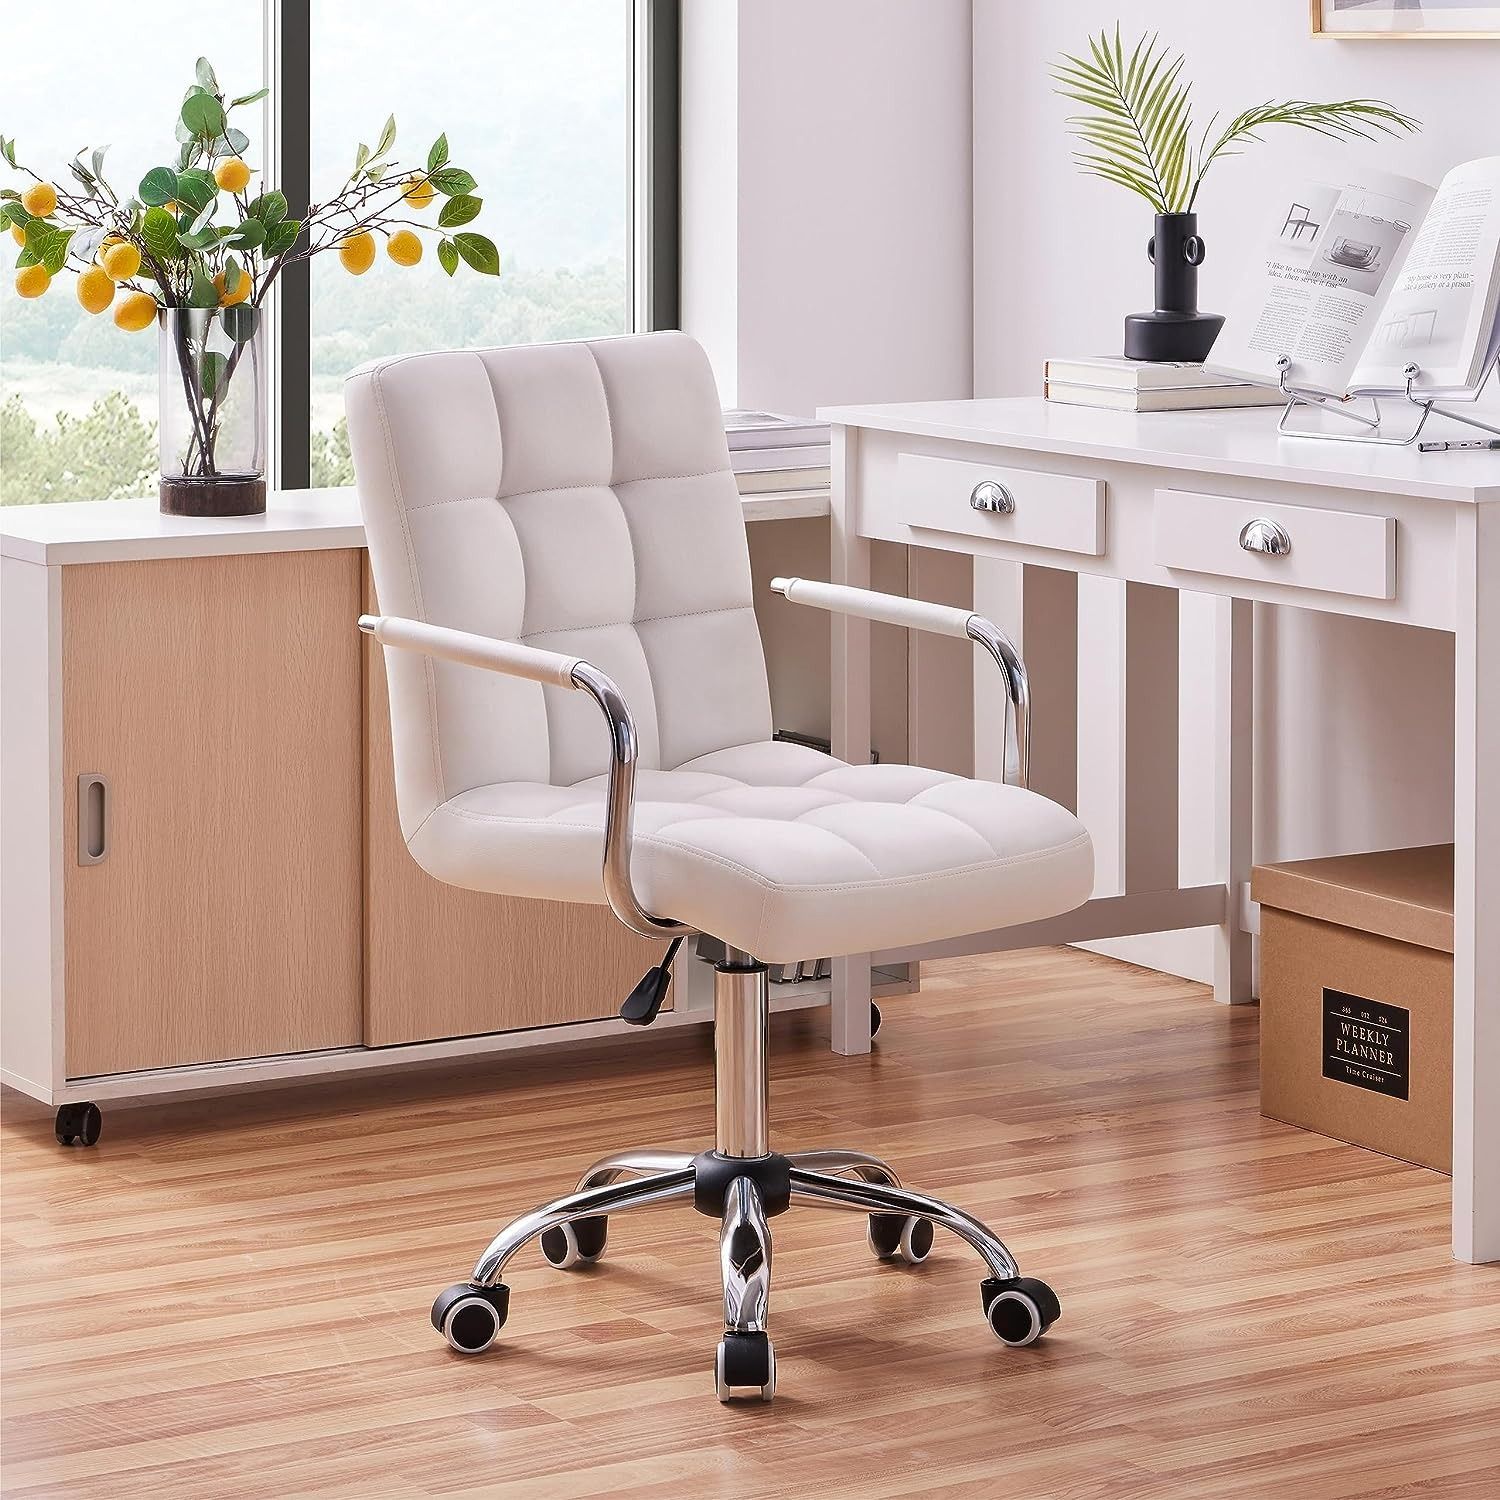 https://hips.hearstapps.com/hmg-prod/images/best-office-chairs-on-amazon-65173f2f65f1c.jpg